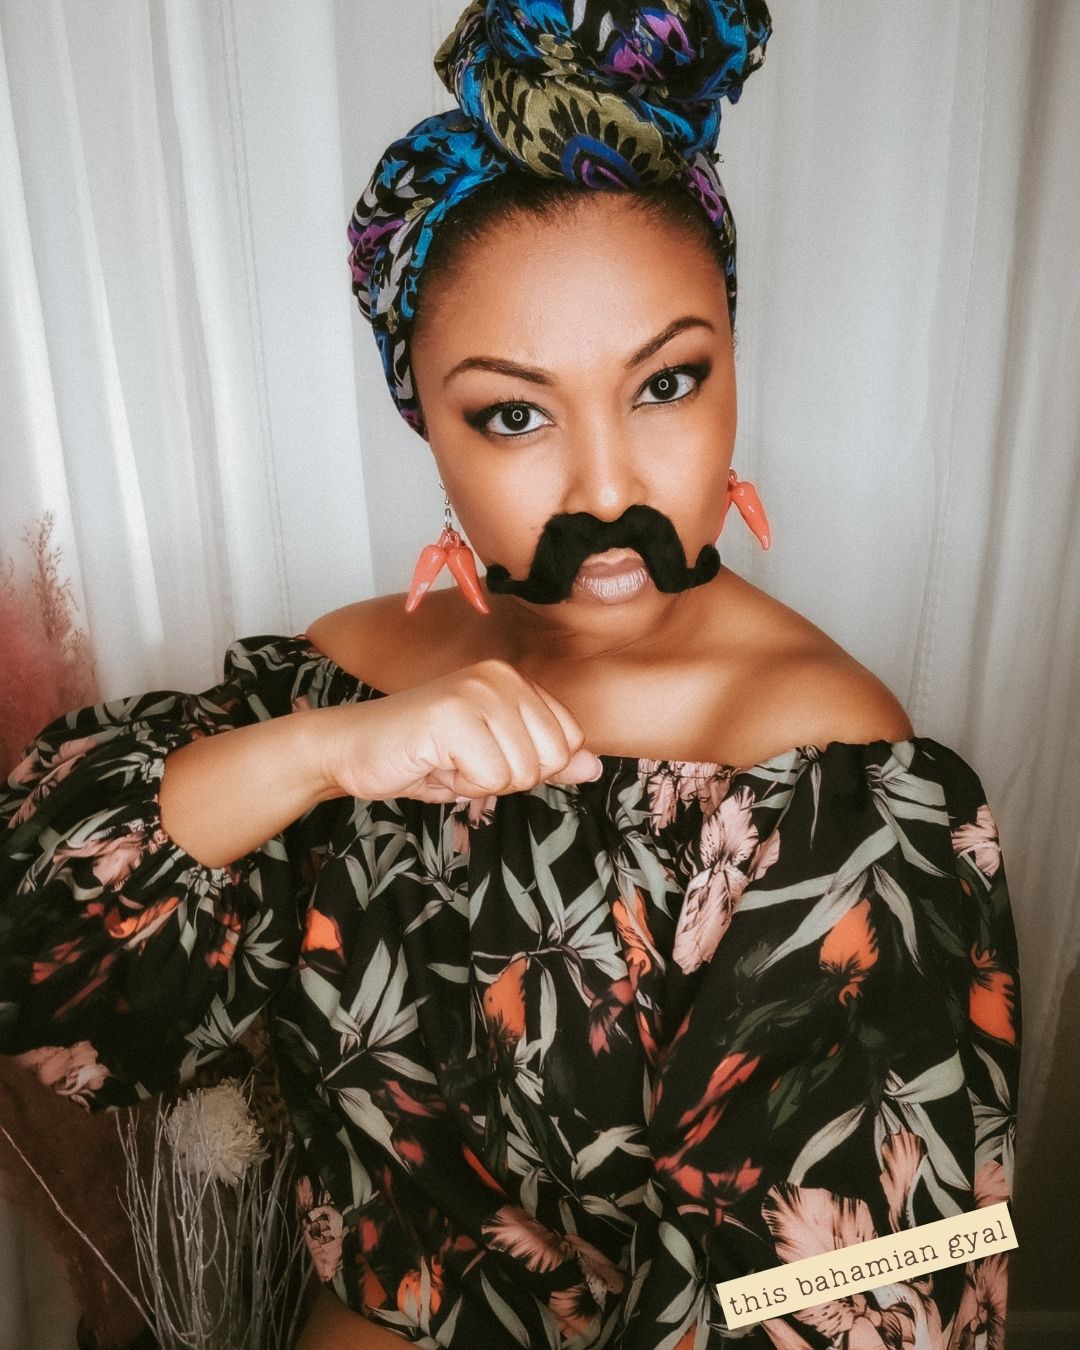 DC blogger This Bahamian Gyal wears a mustache and pepper earrings to celebrate Cinco de mayo.